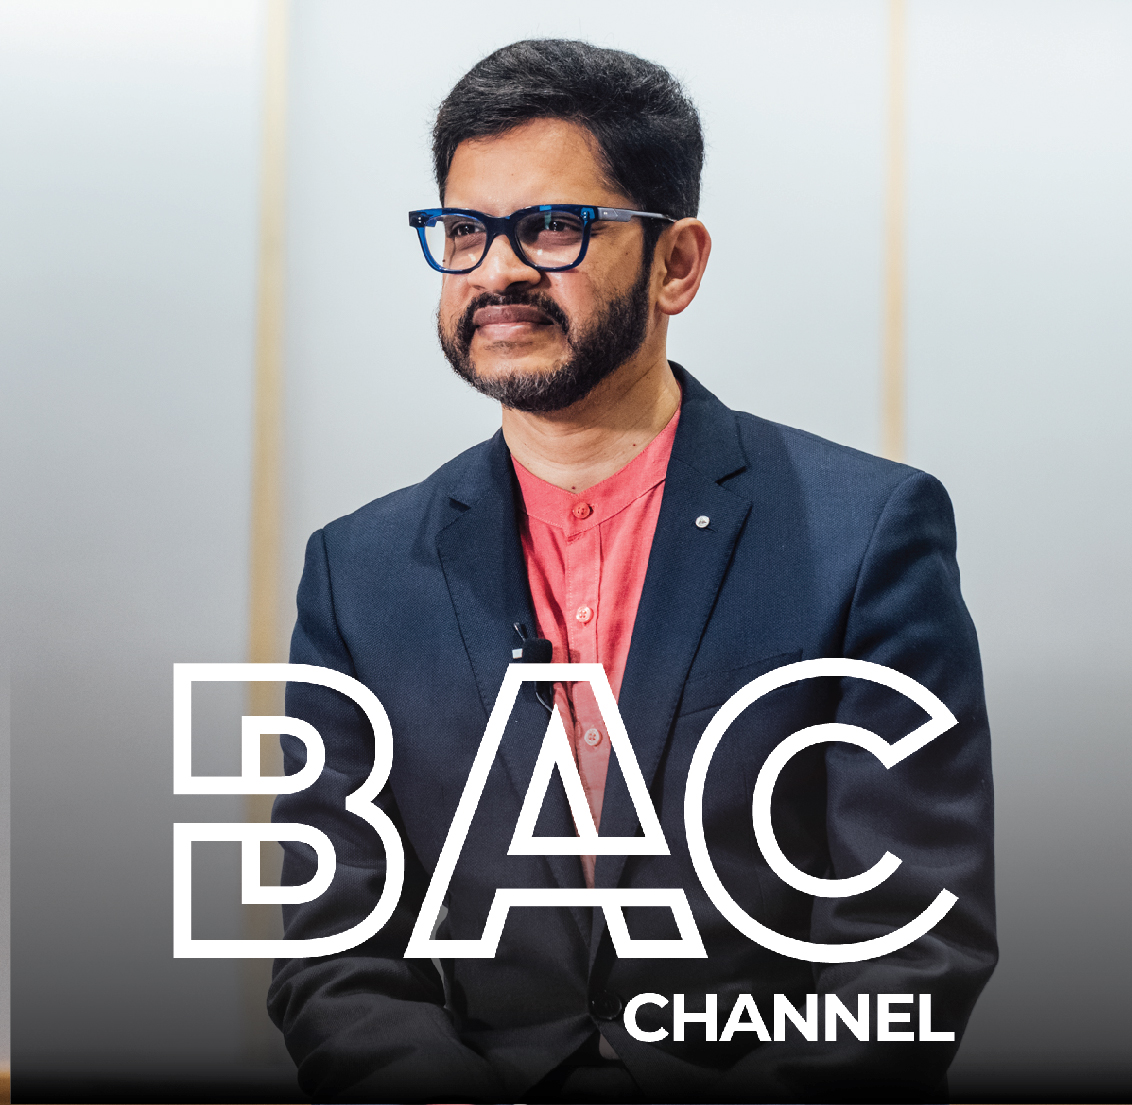 BAC Channel with Mahesh Daas Logo and image of President Daas.